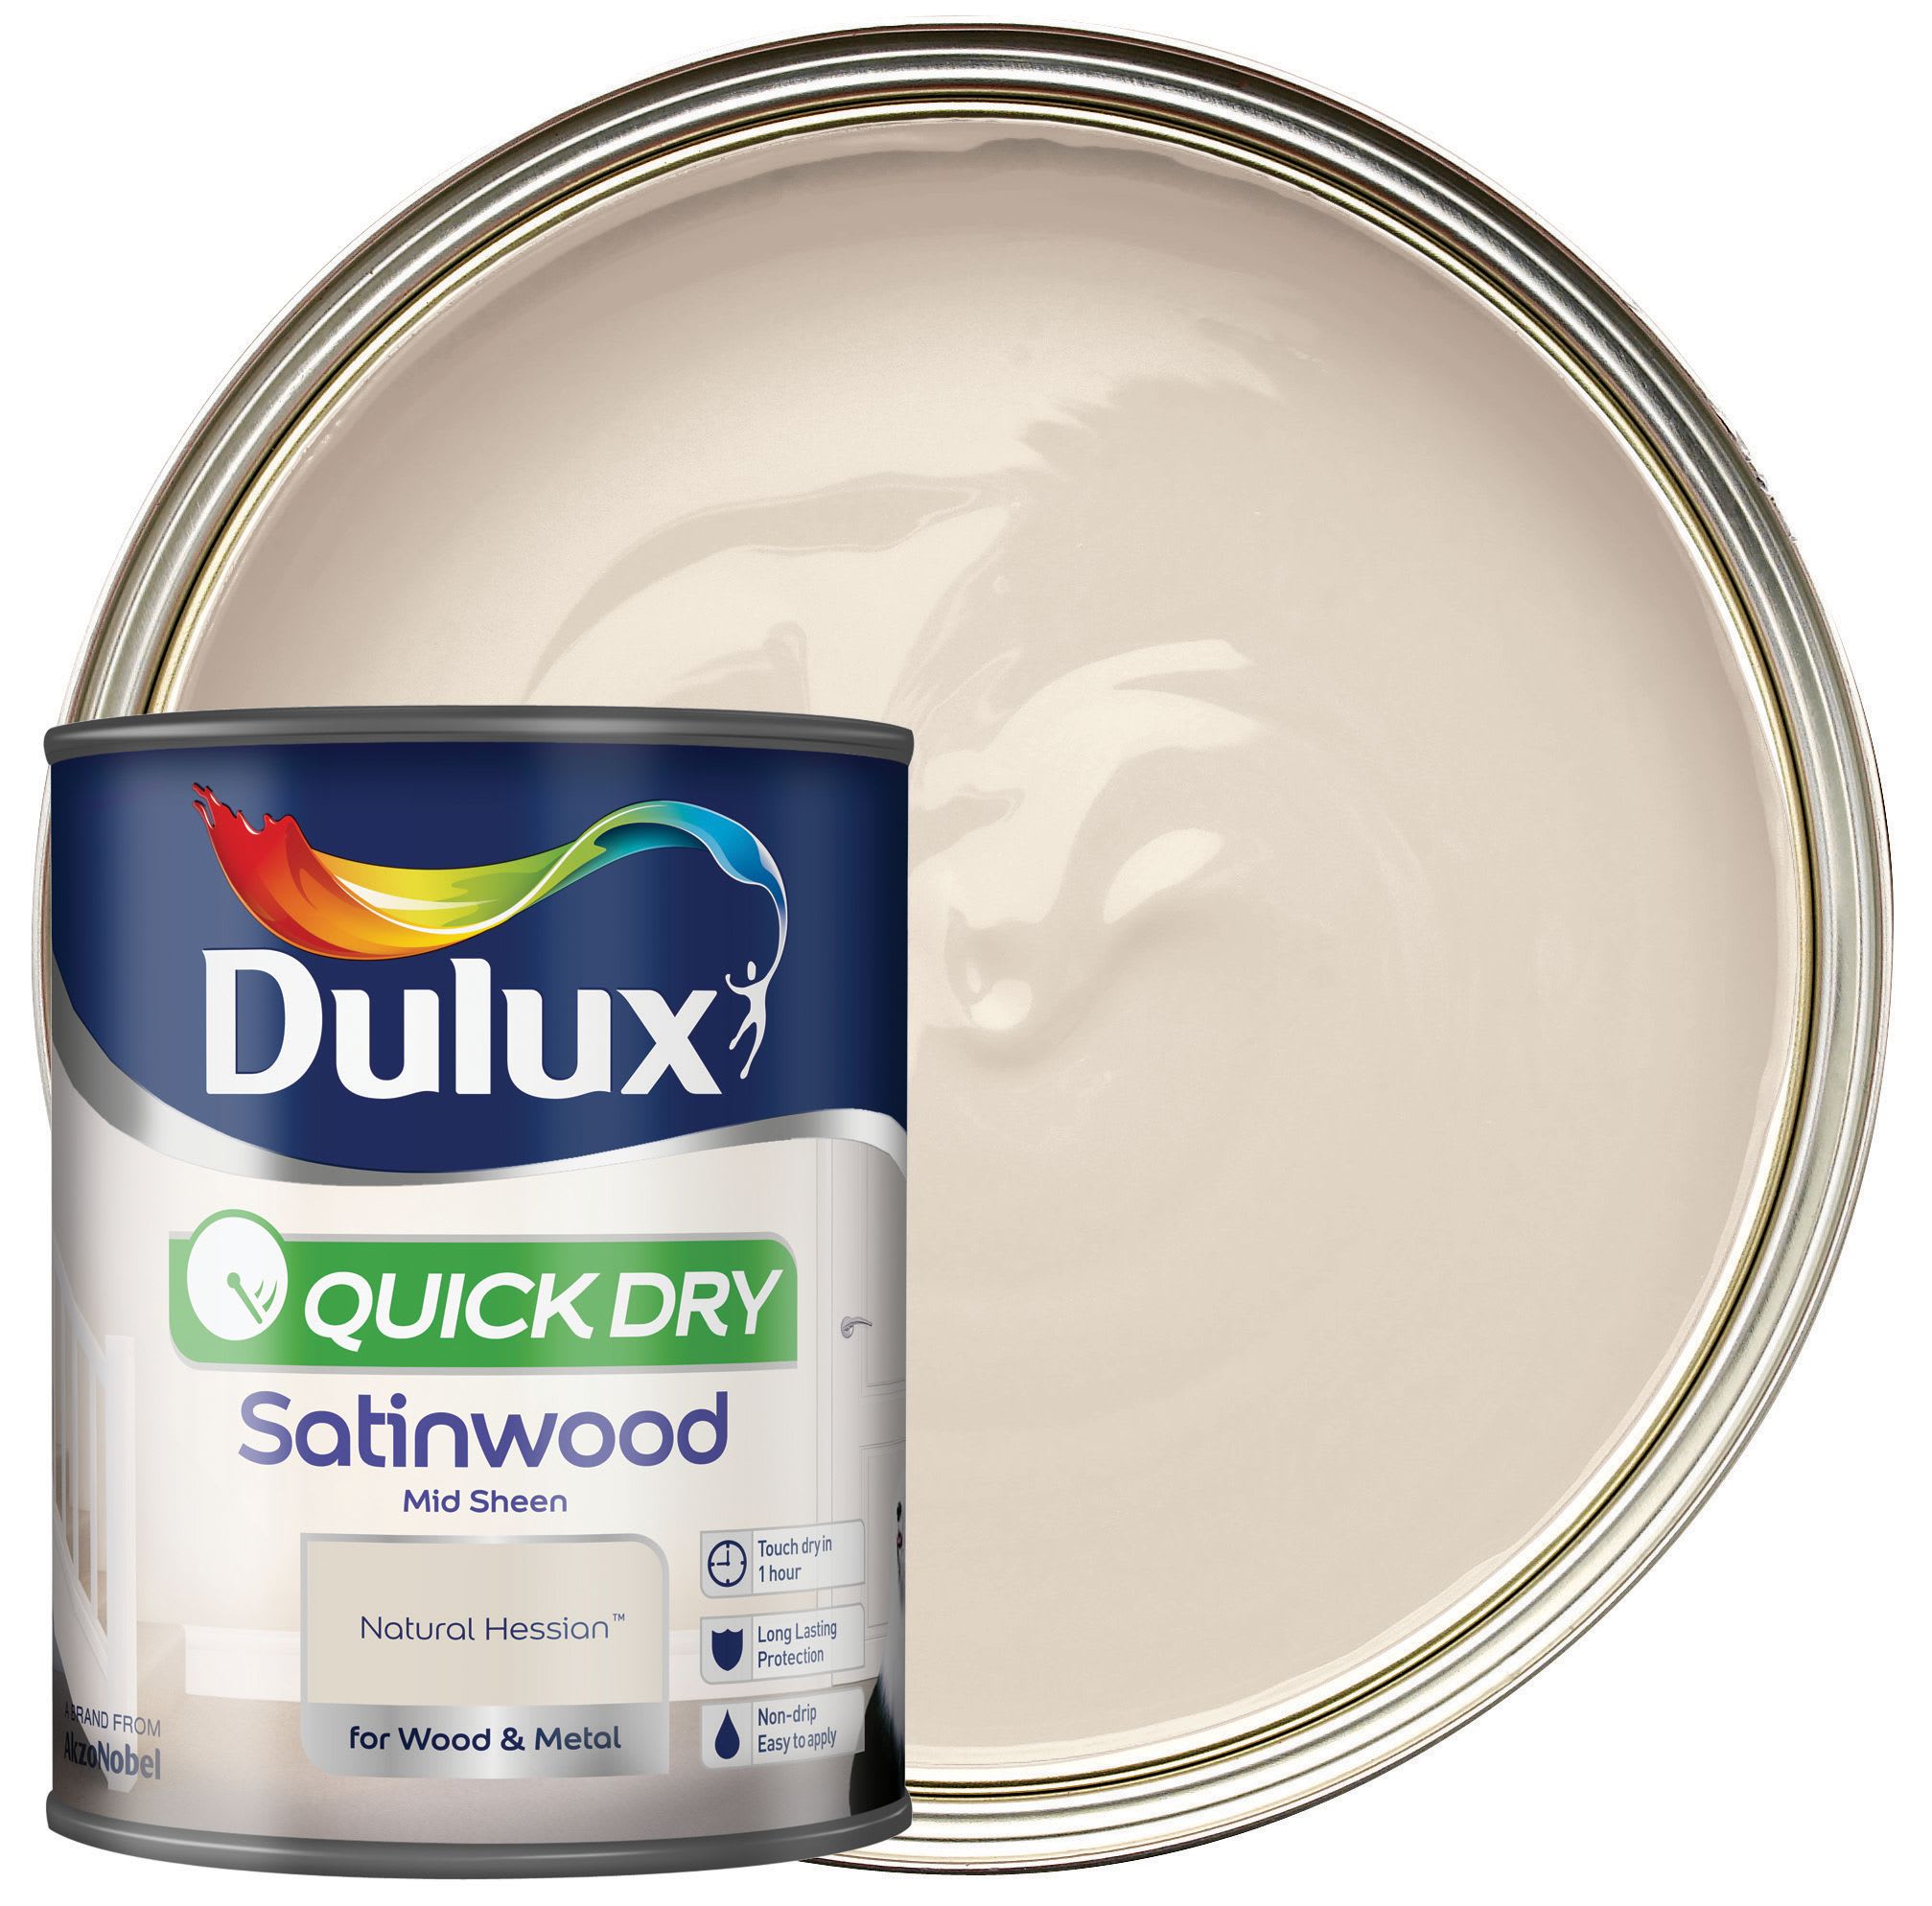 Dulux Quick Dry Satinwood Paint - Natural Hessian